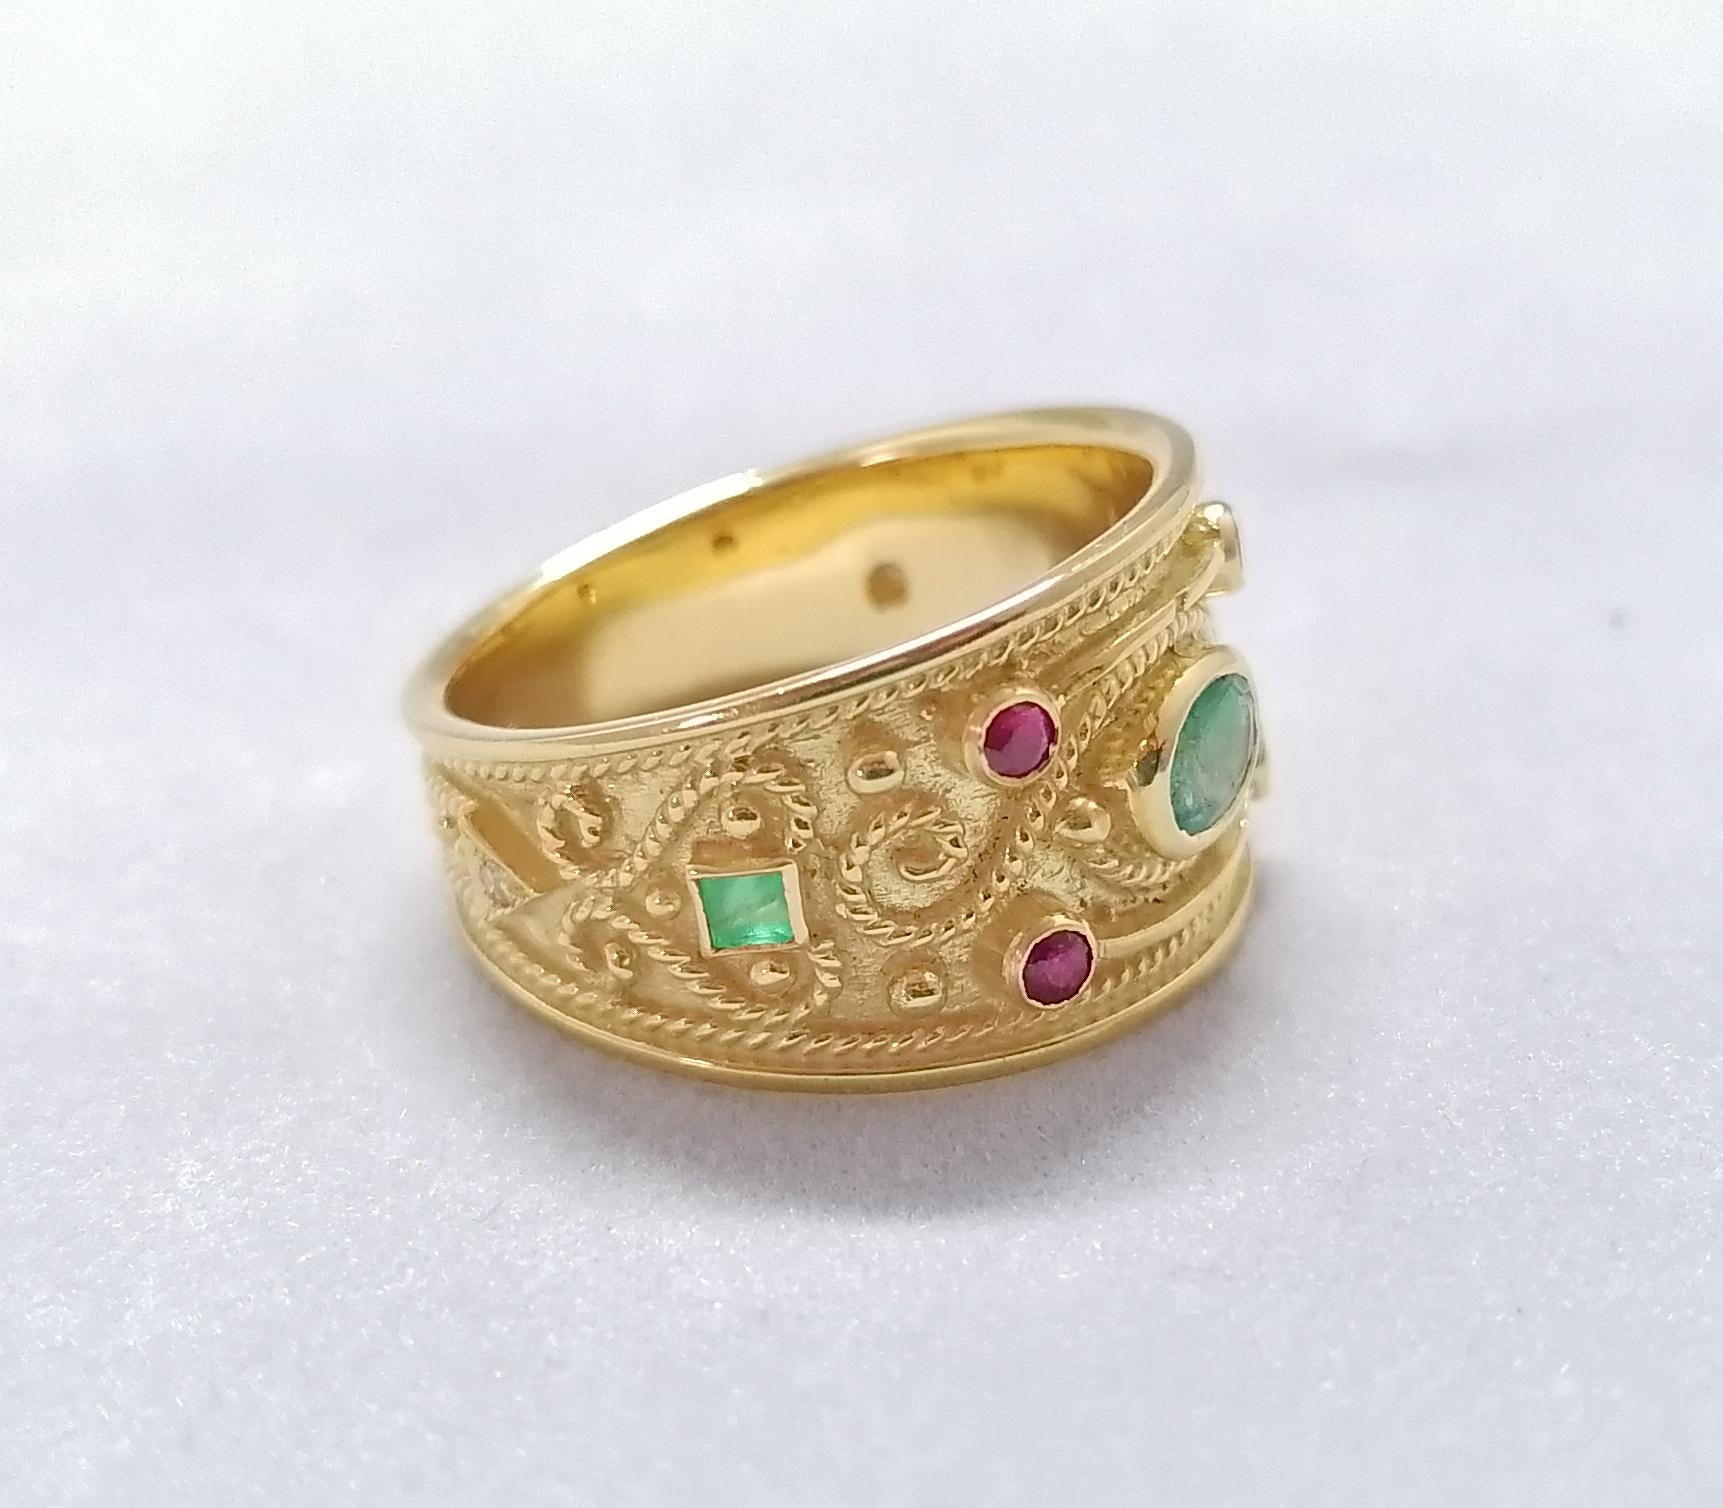 This S.Georgios designer 18 Karat Yellow Gold Multicolor band Ring is all handmade with Byzantine-style bead granulation and a unique velvet background. This gorgeous band ring features an Oval cut natural Emerald, framed by 2 square cut Emeralds